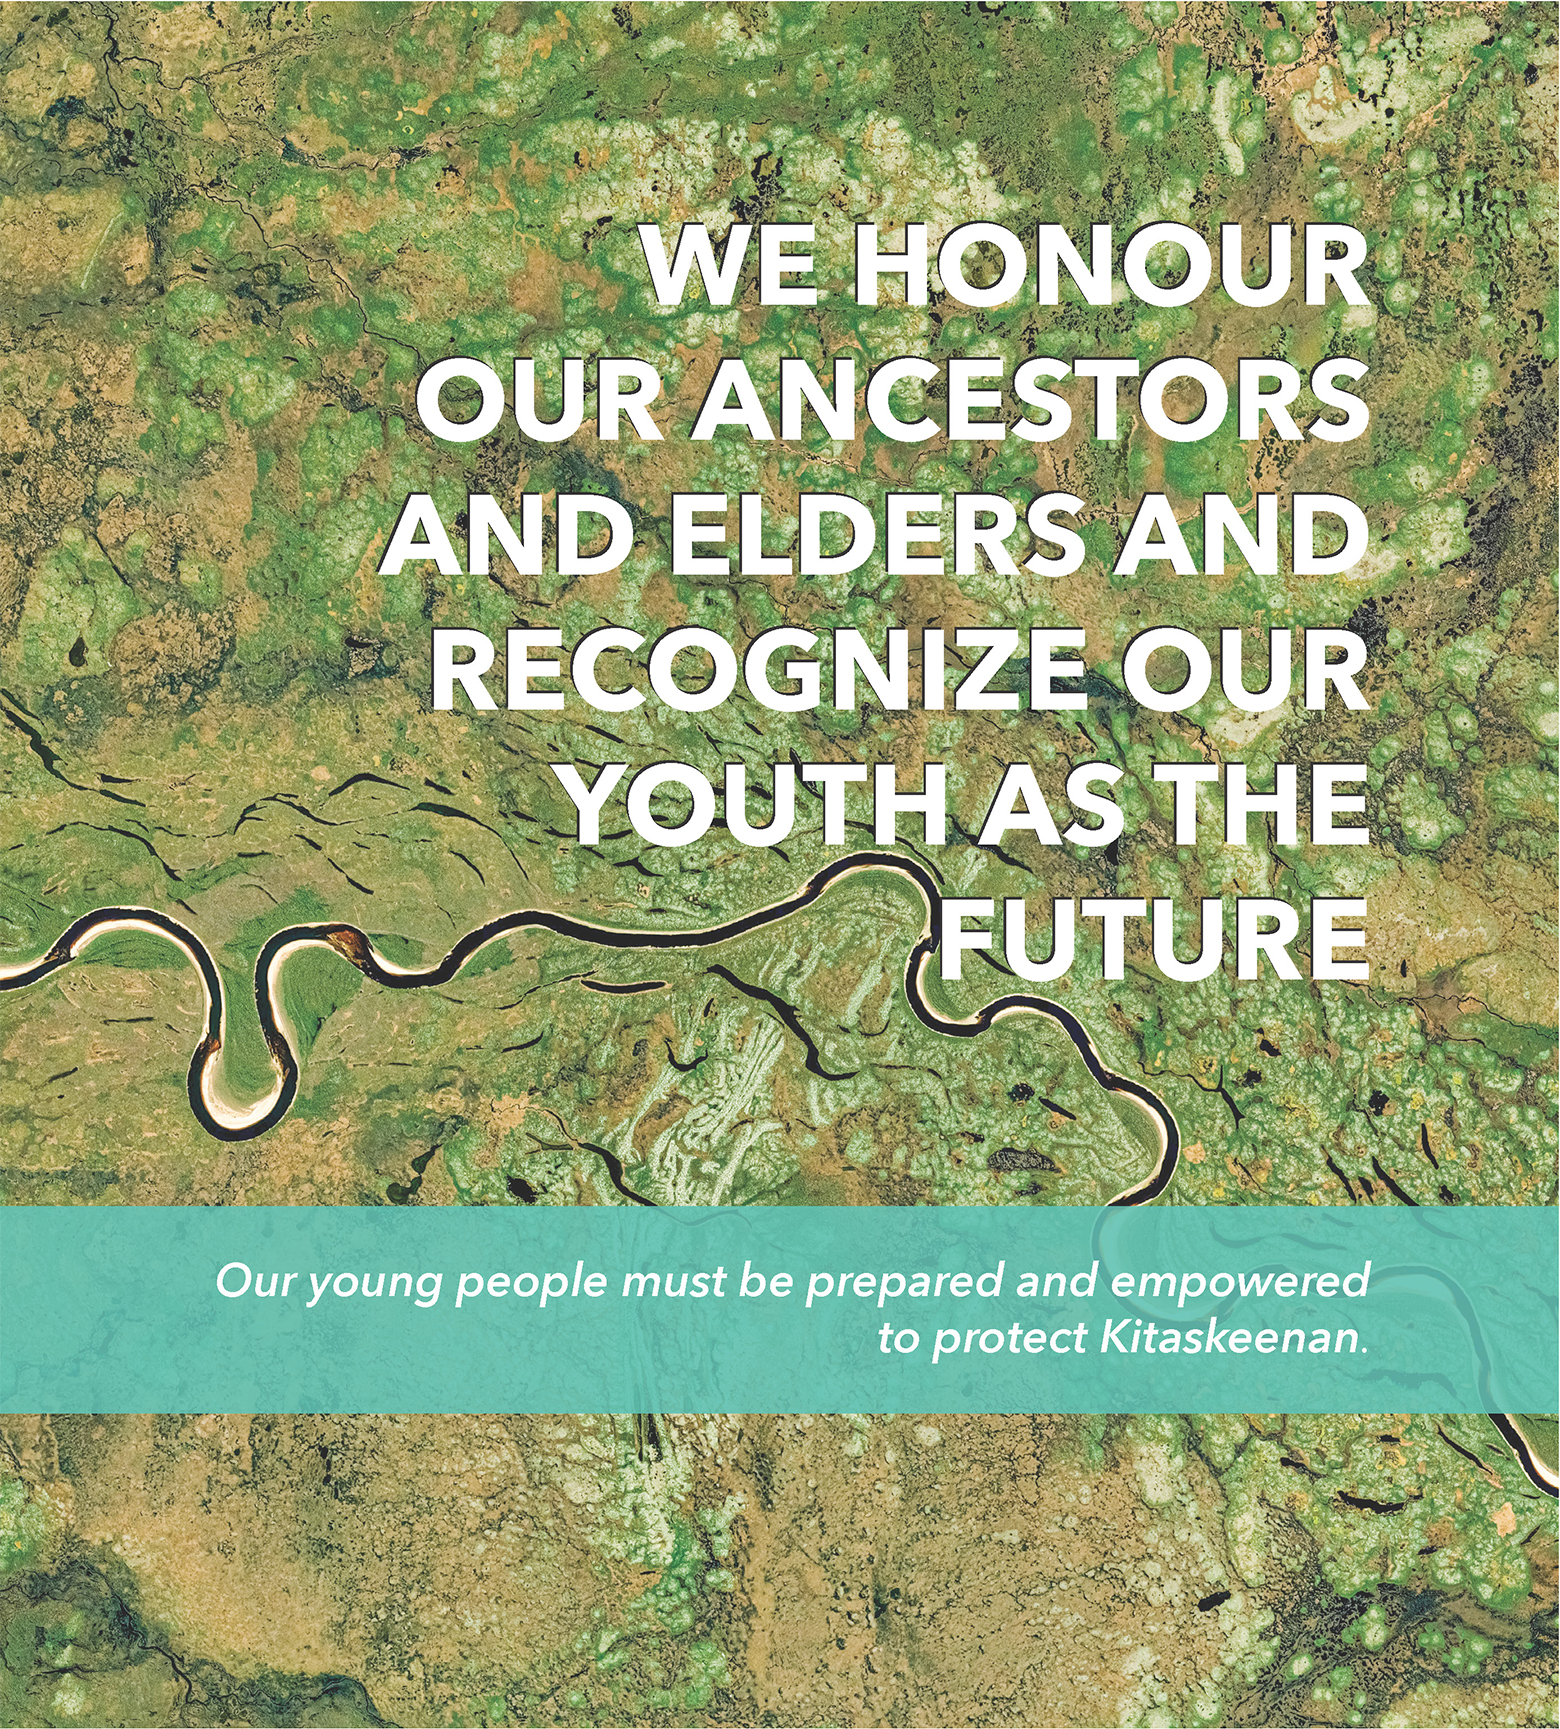 WE HONOR OUR ANCESTORS AND ELDERS AND RECOGNIZE OUR YOUTH AS THE FUTURE